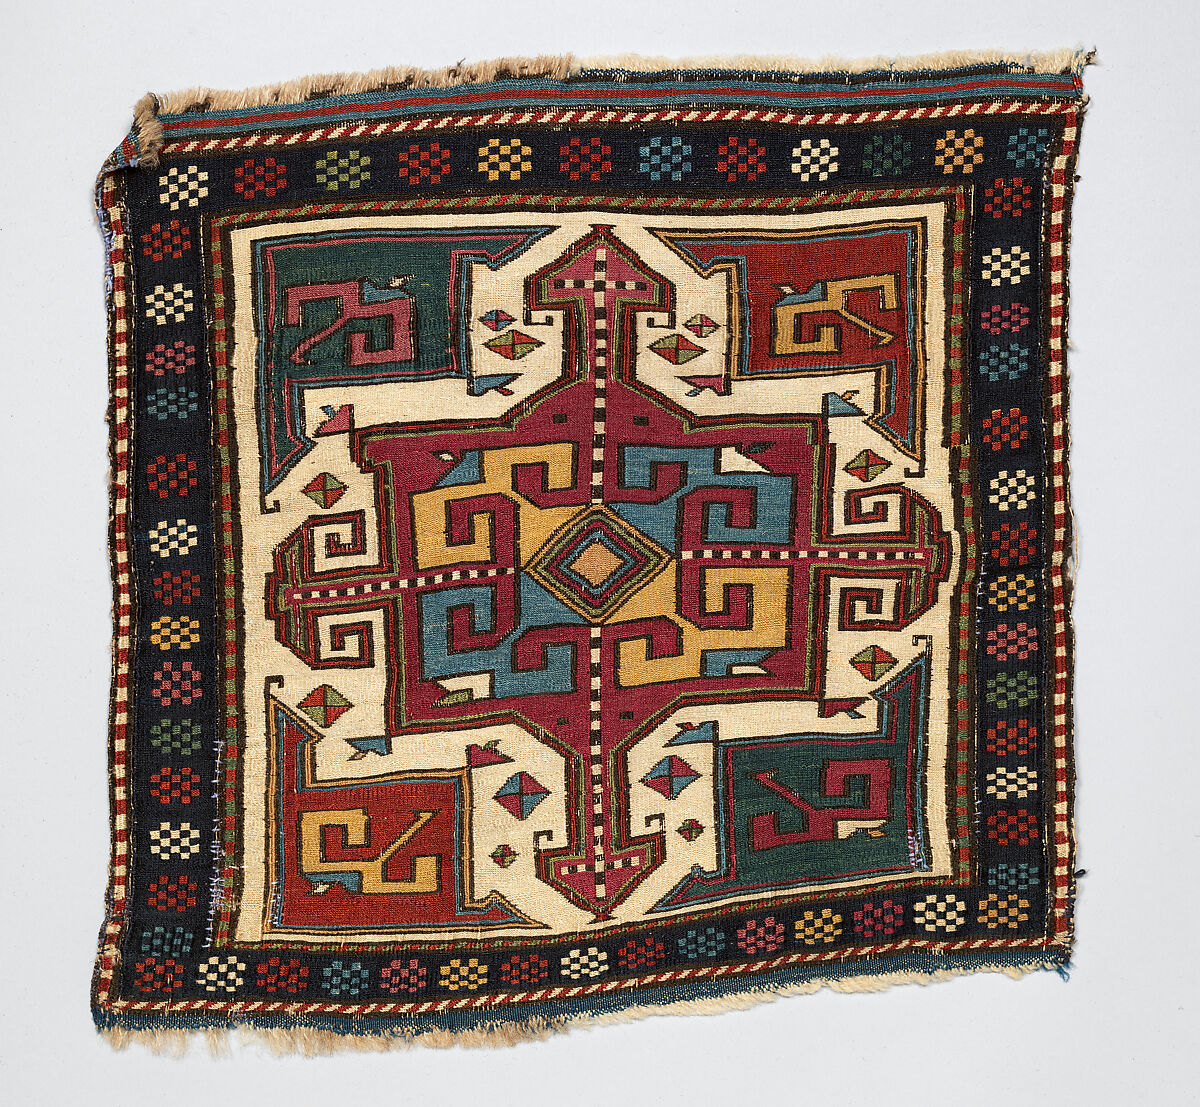 Face of Half a Double Saddle Bag (Khorjin), Wool (warp, ground weft, and sumak weft); sumak extra-weft wrapping and border pattern in complementary weft weave 